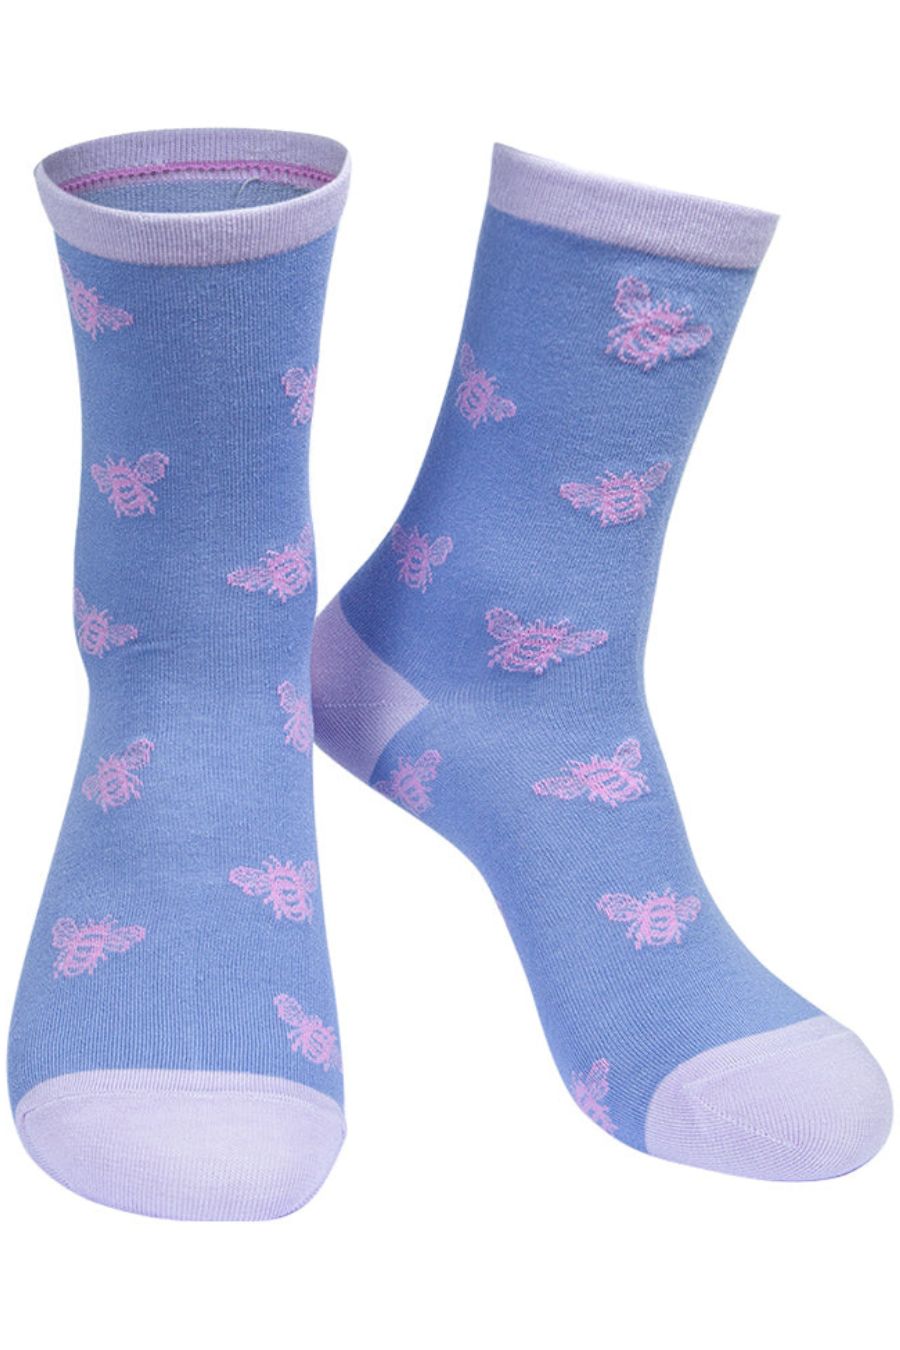 lilac ankle socks with an all over bee pattern